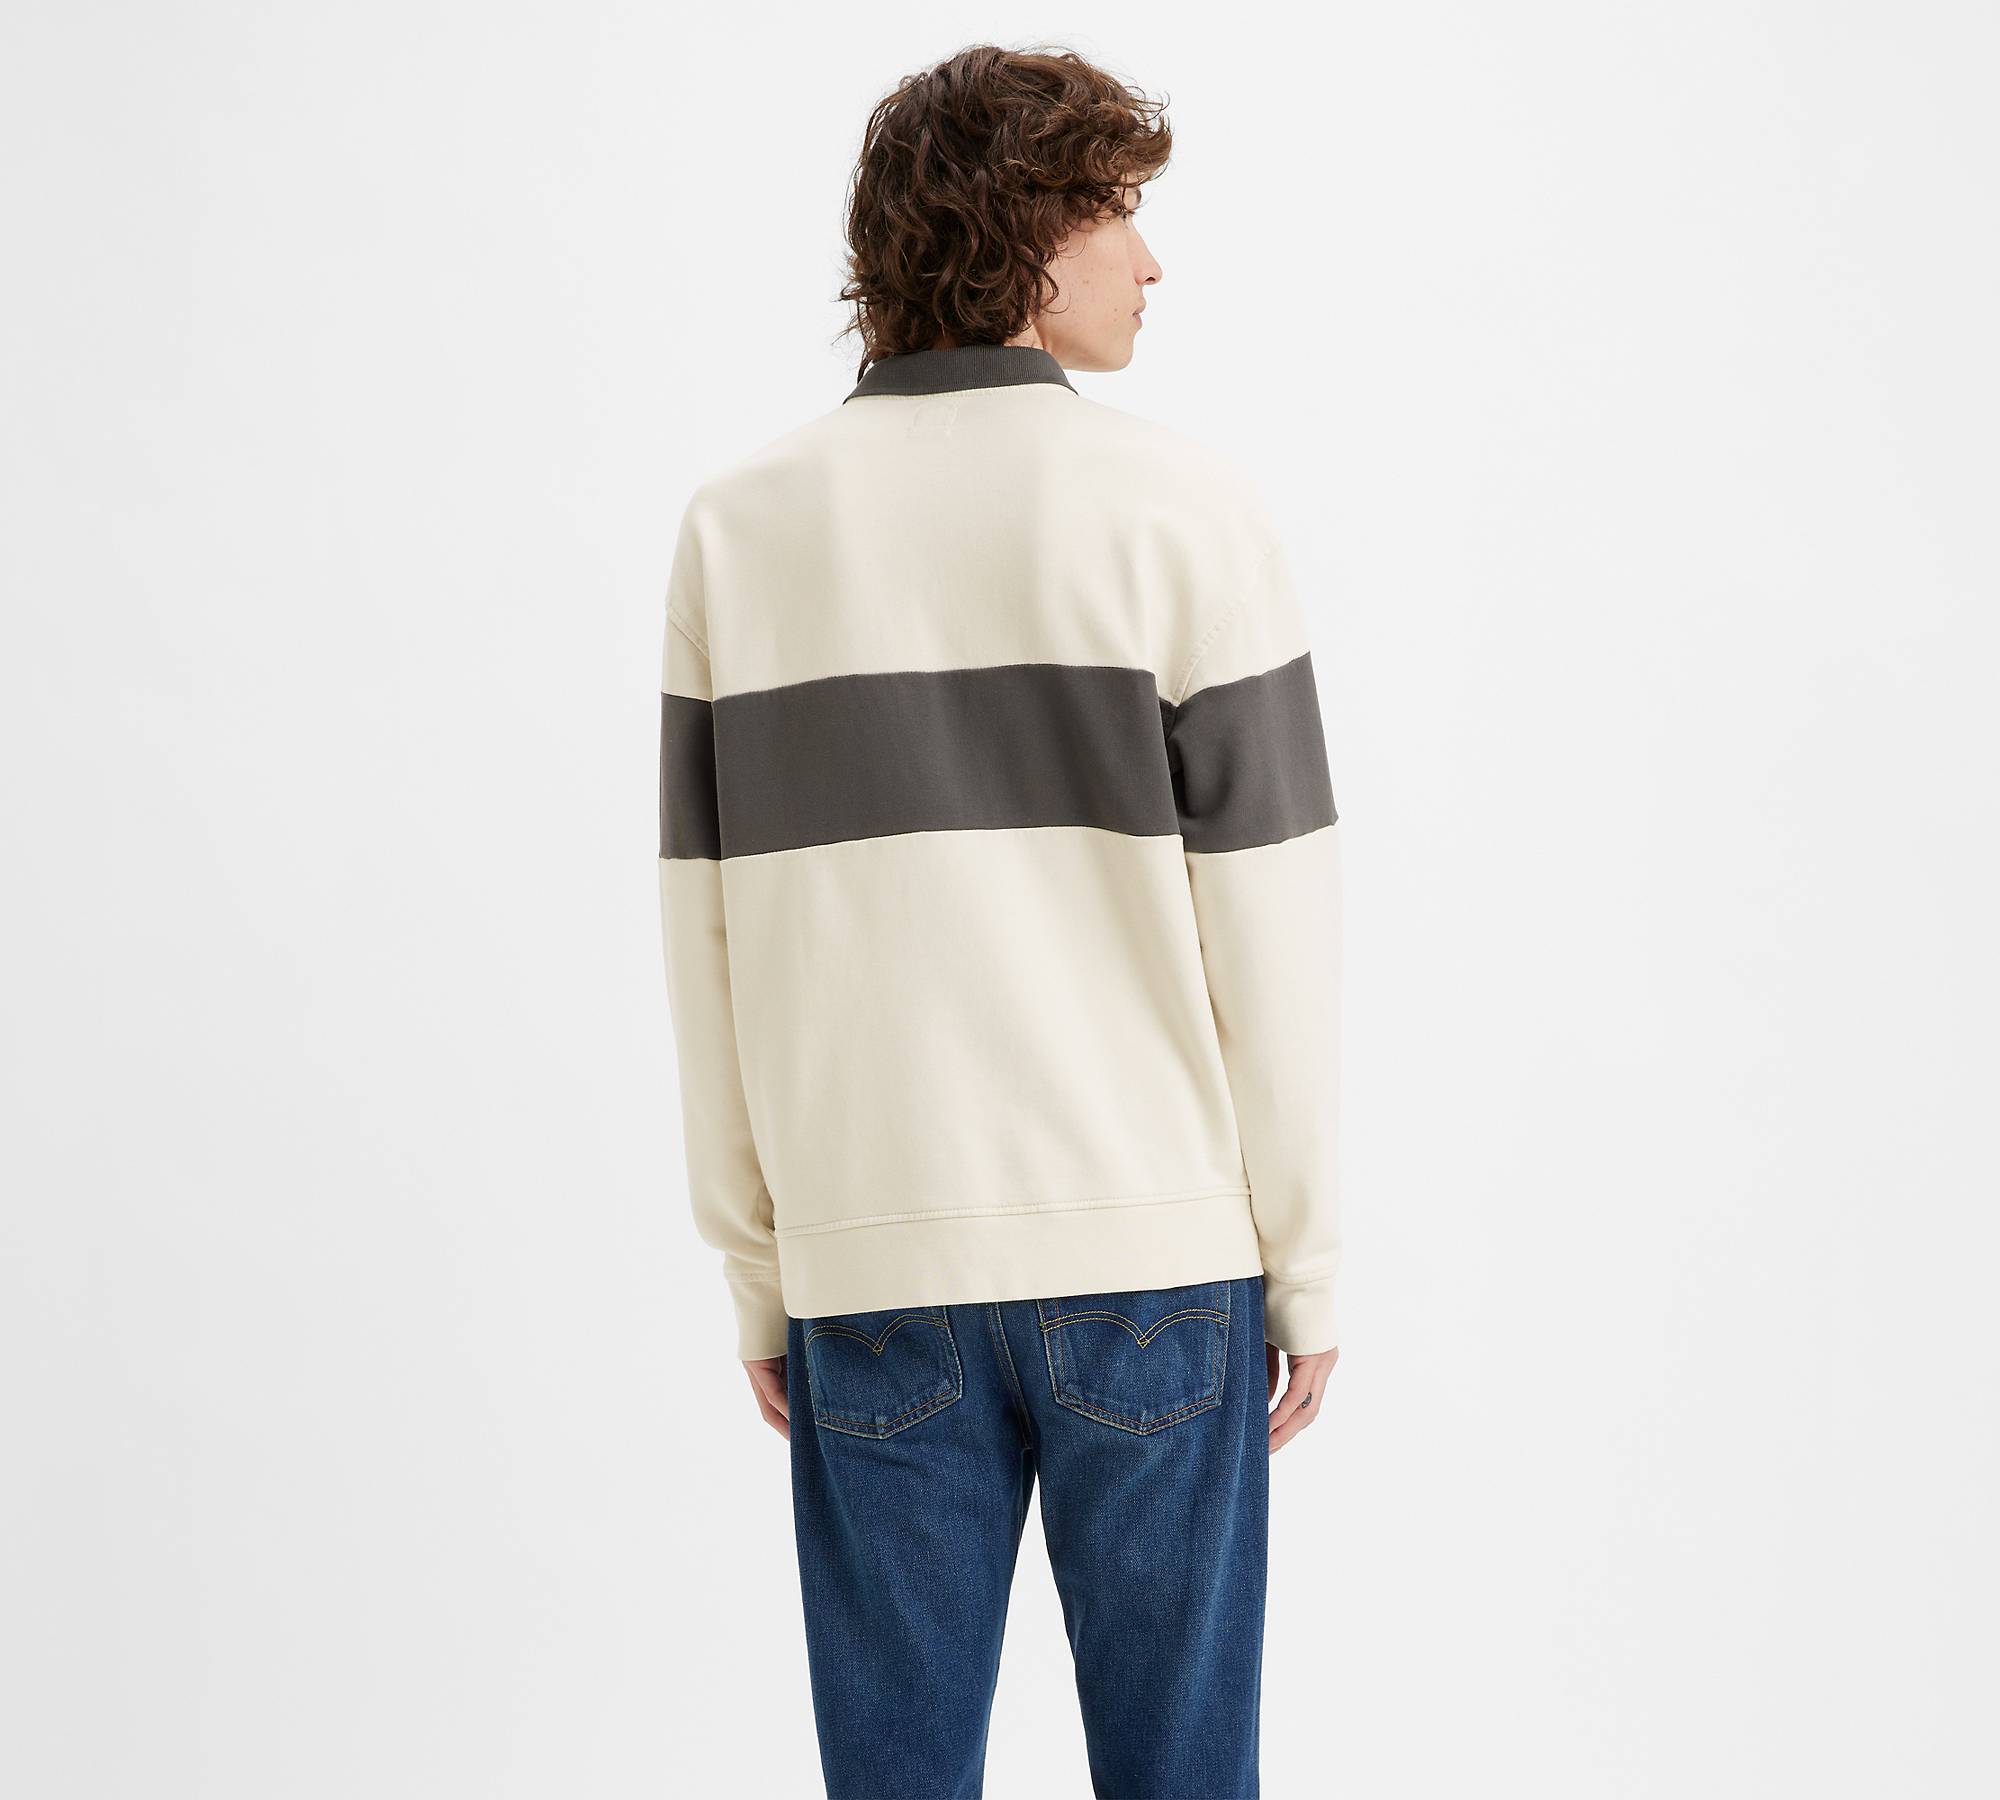 Archive Collared Crew Shirt - White | Levi's® US